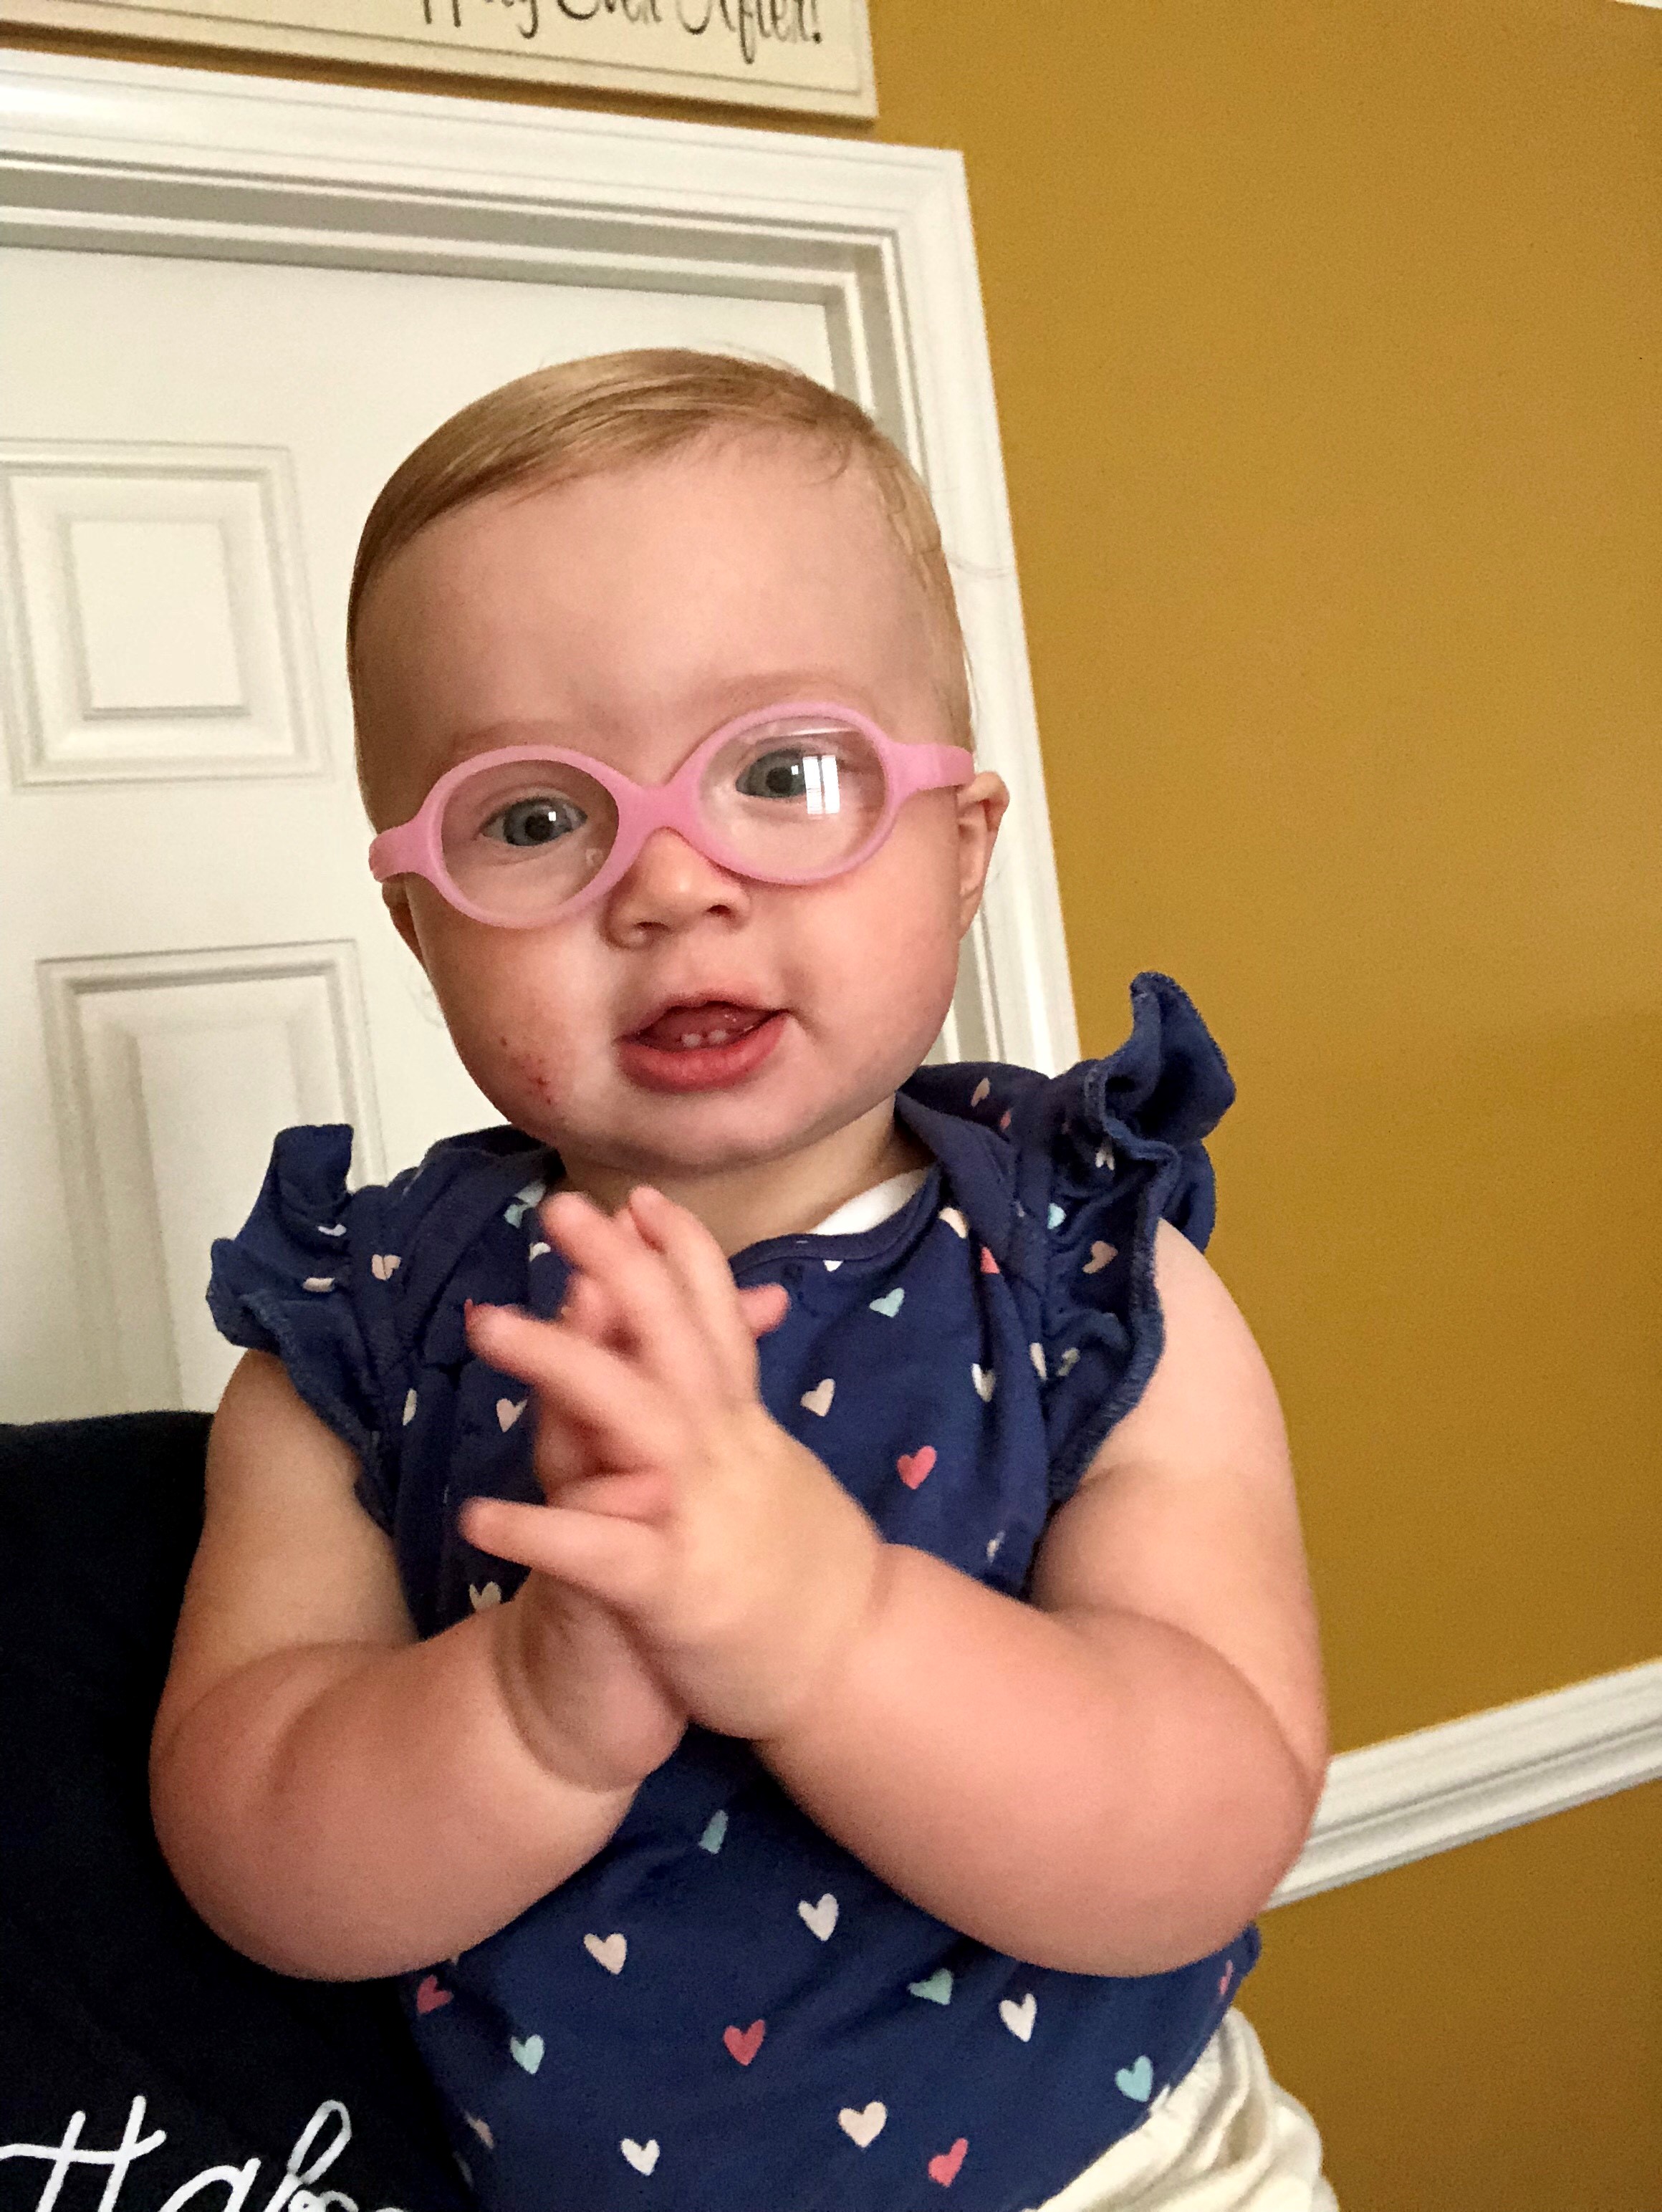 Baby girl has joyful reaction to first pair of glasses | abc7ny.com